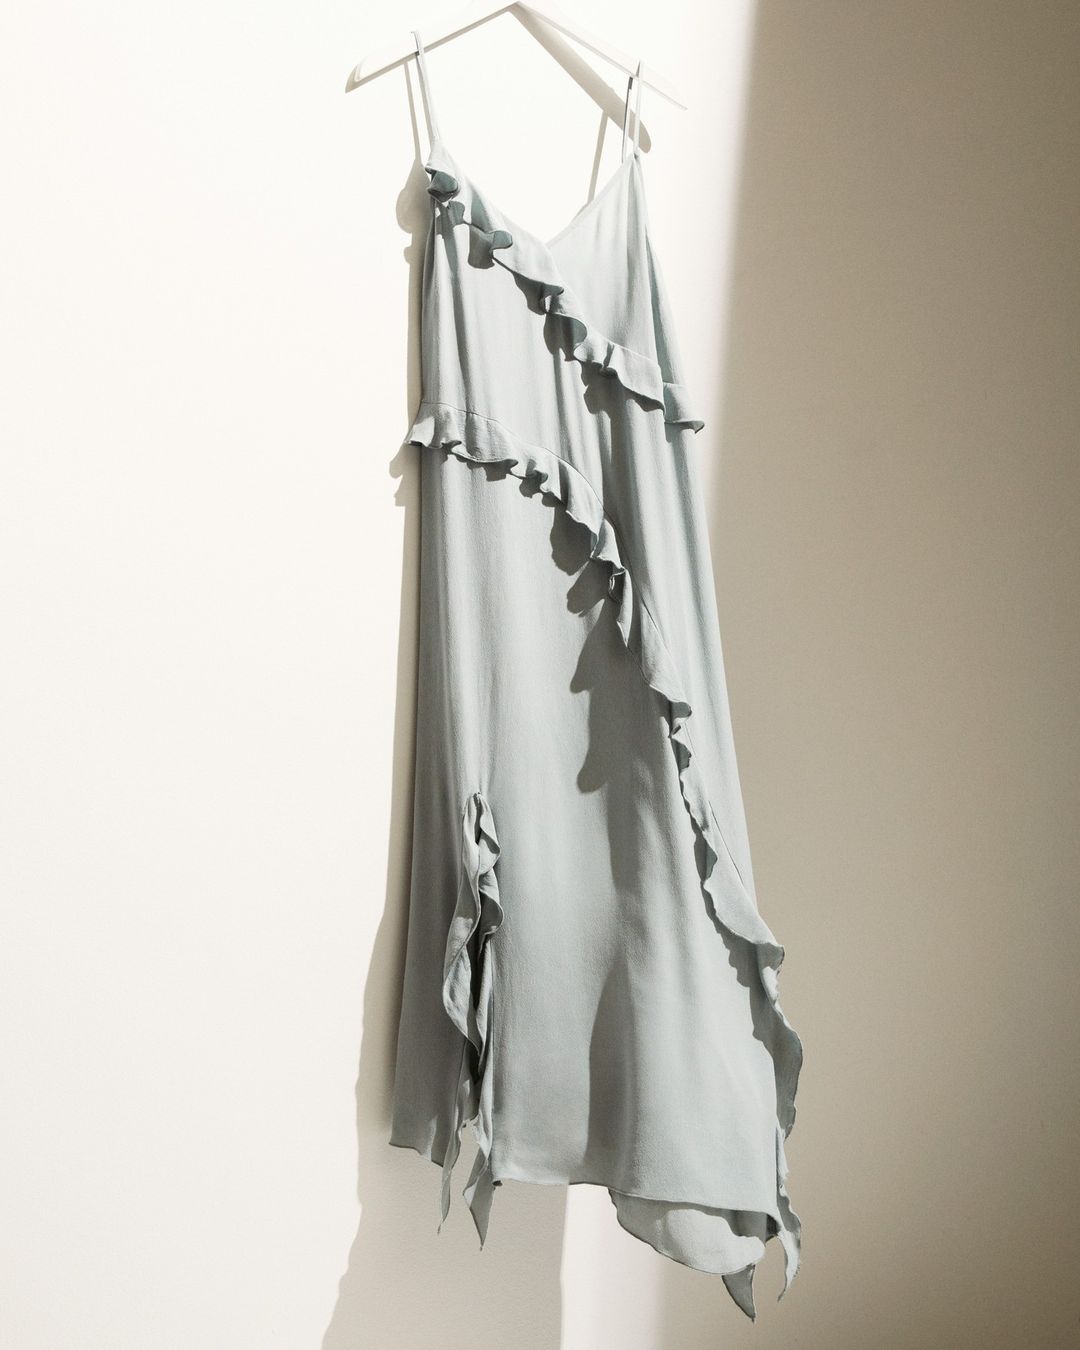 lifestyle image of a seamoss ruffled asymmetrical dress from H&M hanging on a hanger against a white wall